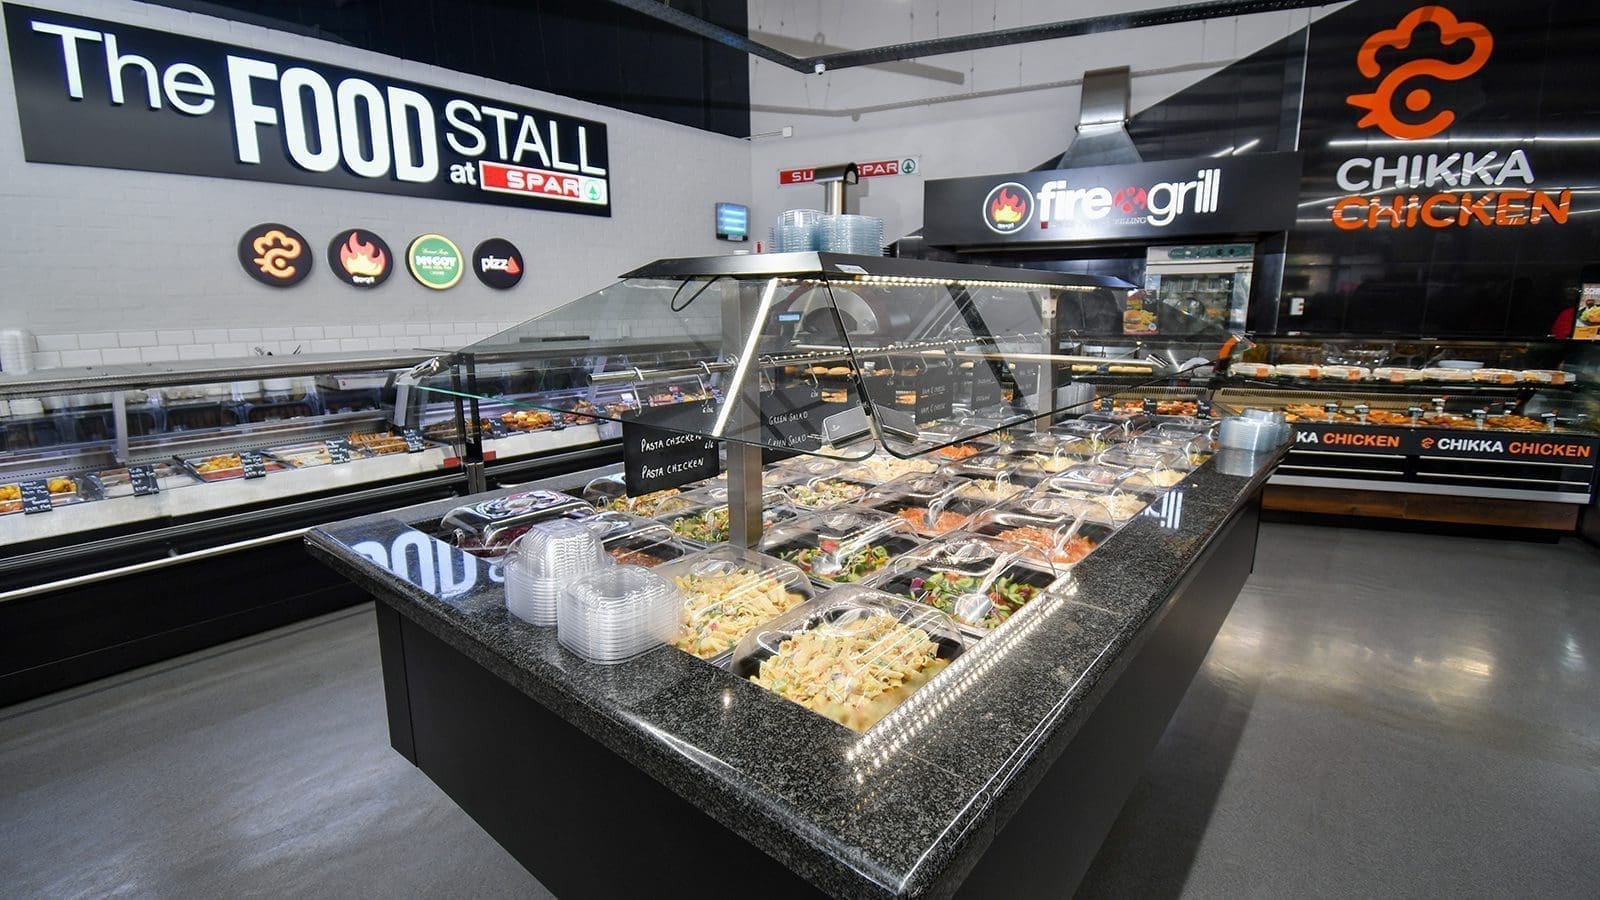 Spar Group launches The Food Stall to expand offering of convenient, ready-made meals